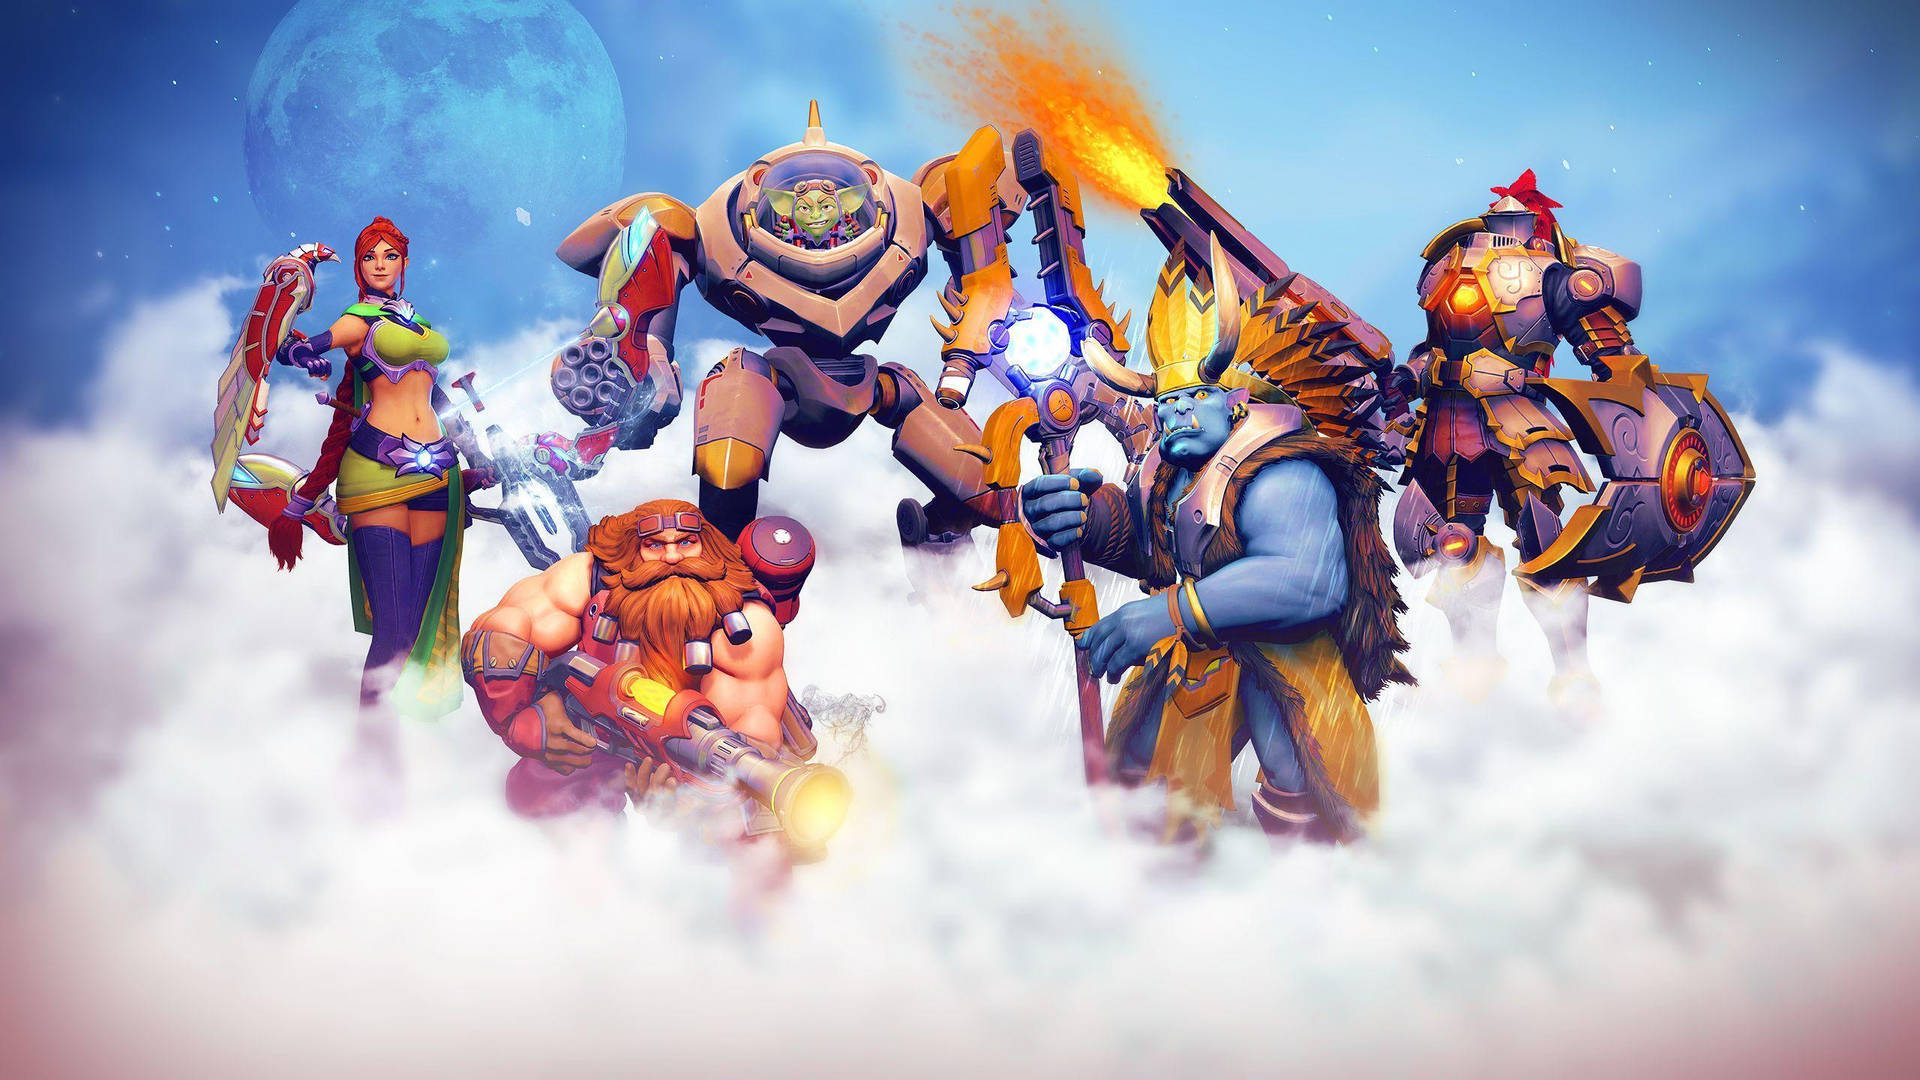 Video Game Paladins Champions Crew On Clouds Wallpaper